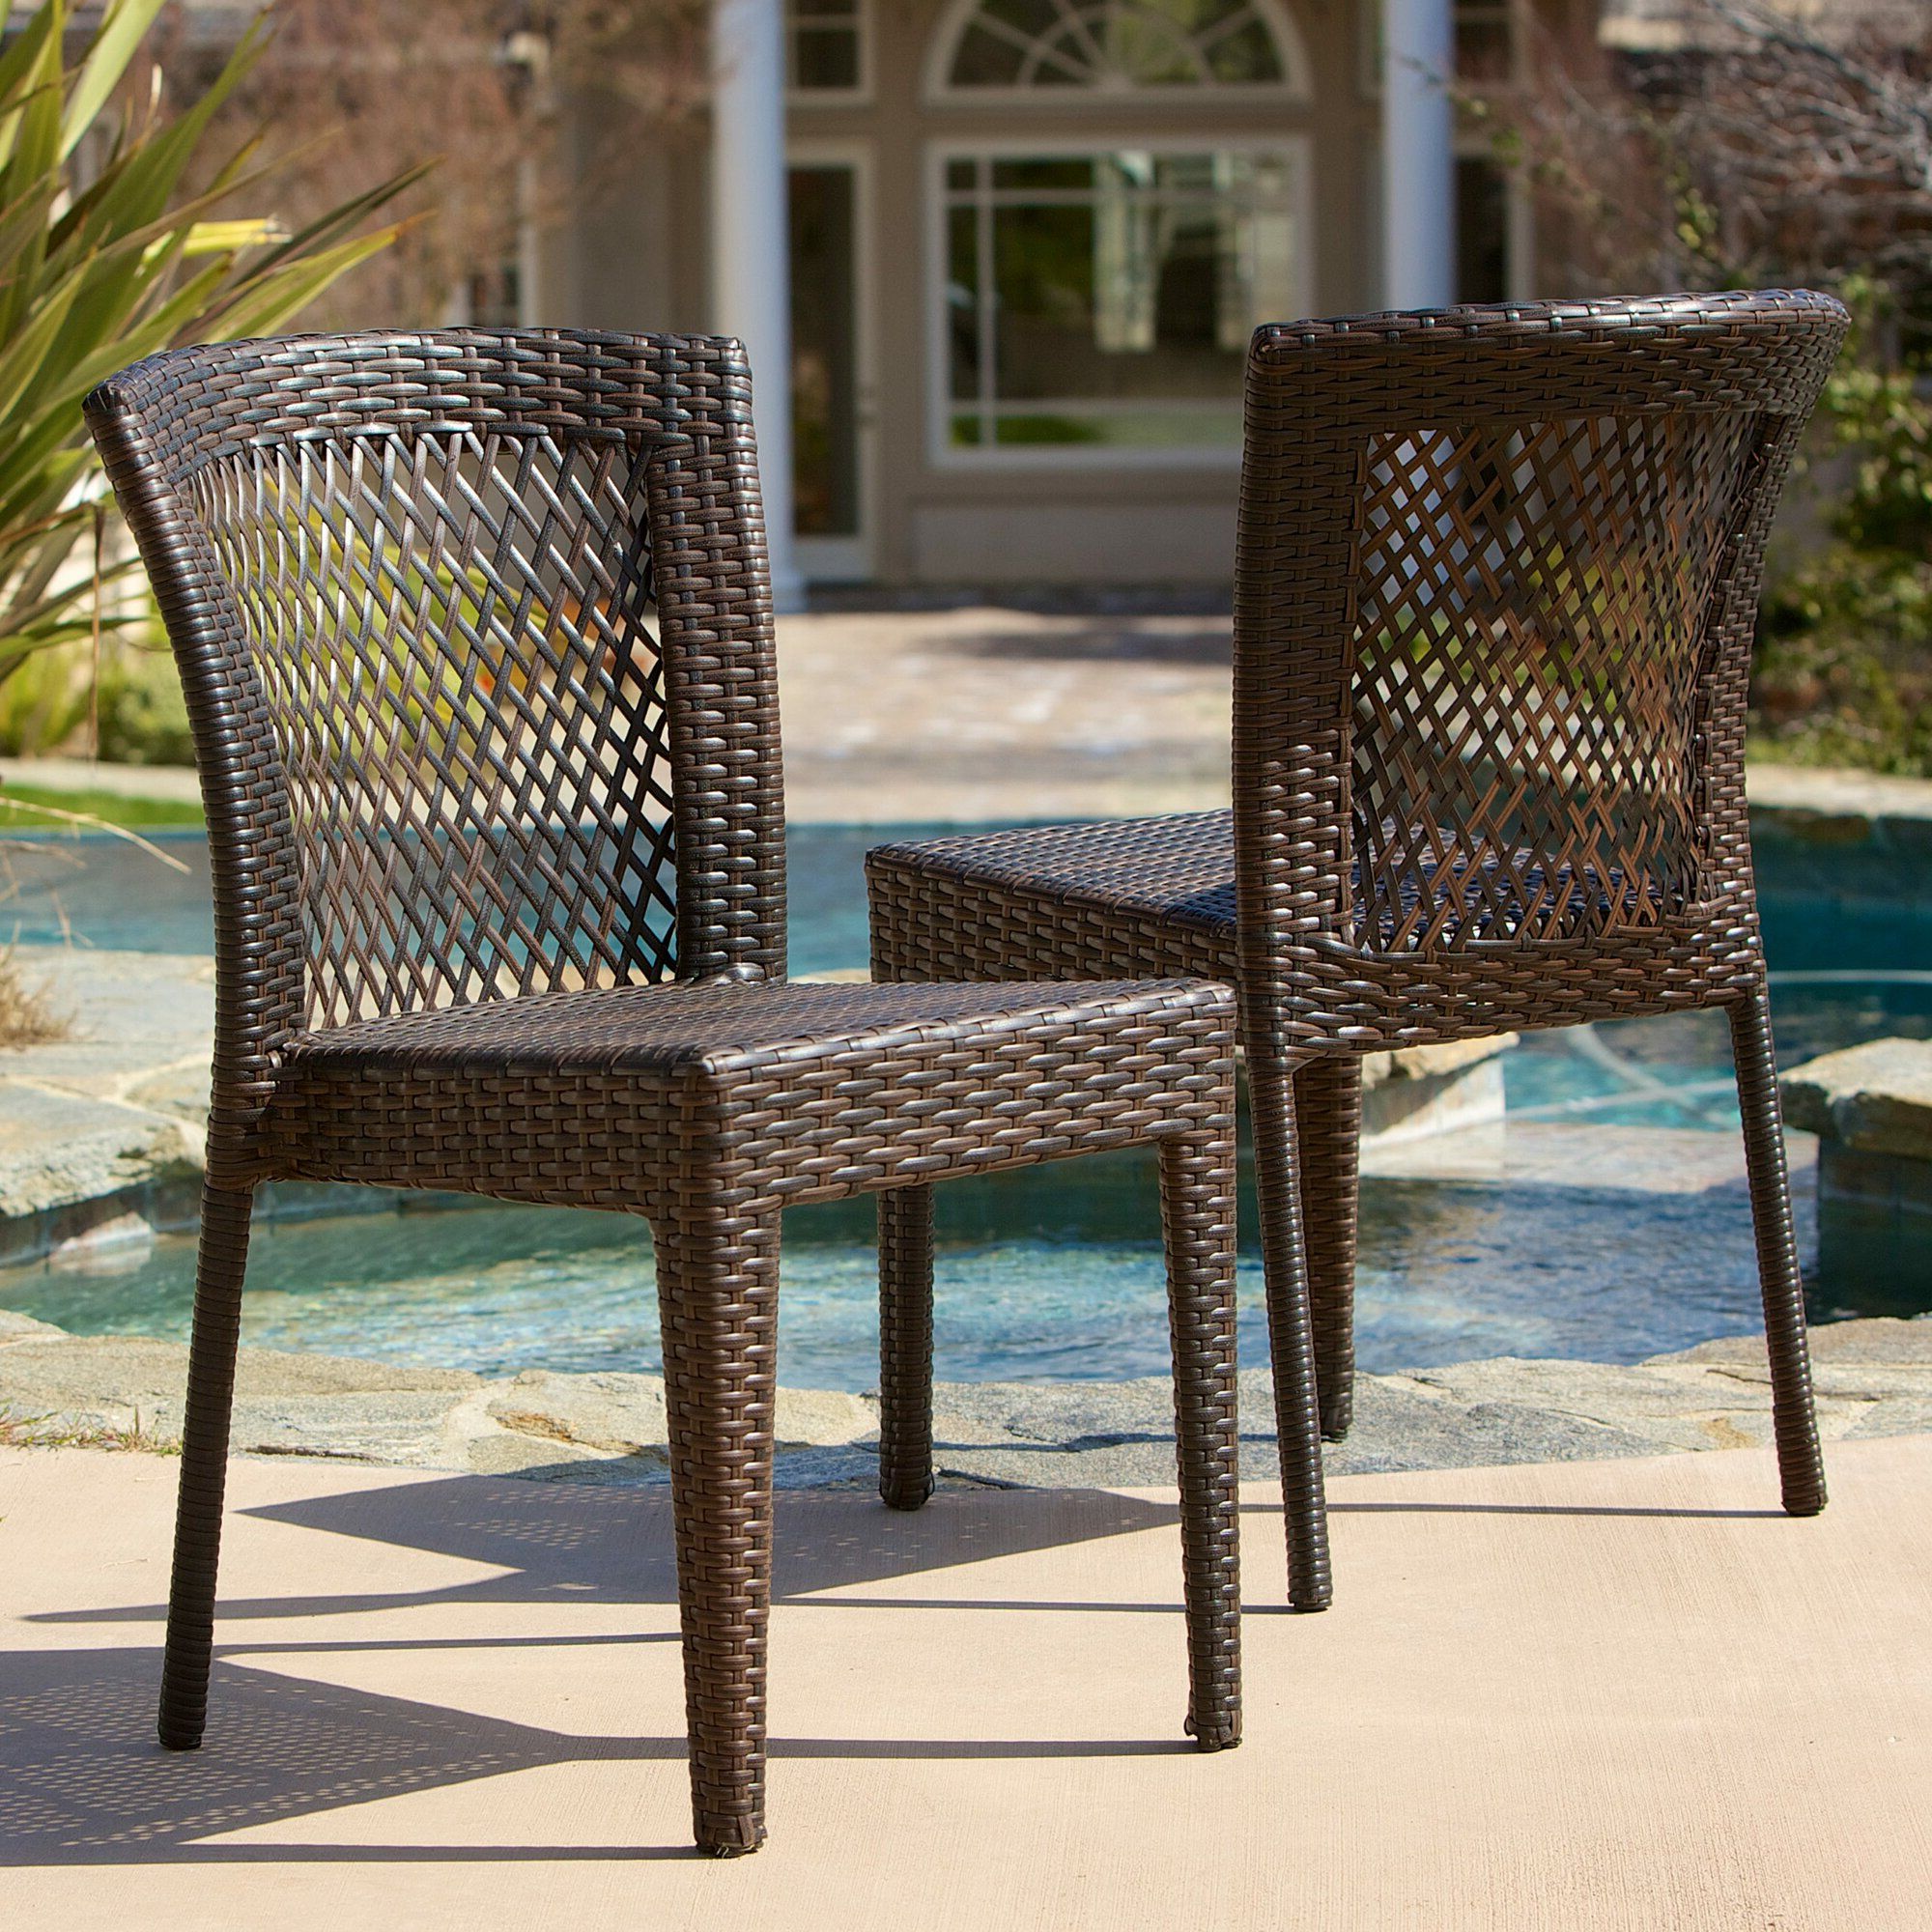 Rattan Wicker Outdoor Seating Sets Within Well Liked Breakwater Bay Dawson Outdoor Wicker Chair & Reviews (View 4 of 15)